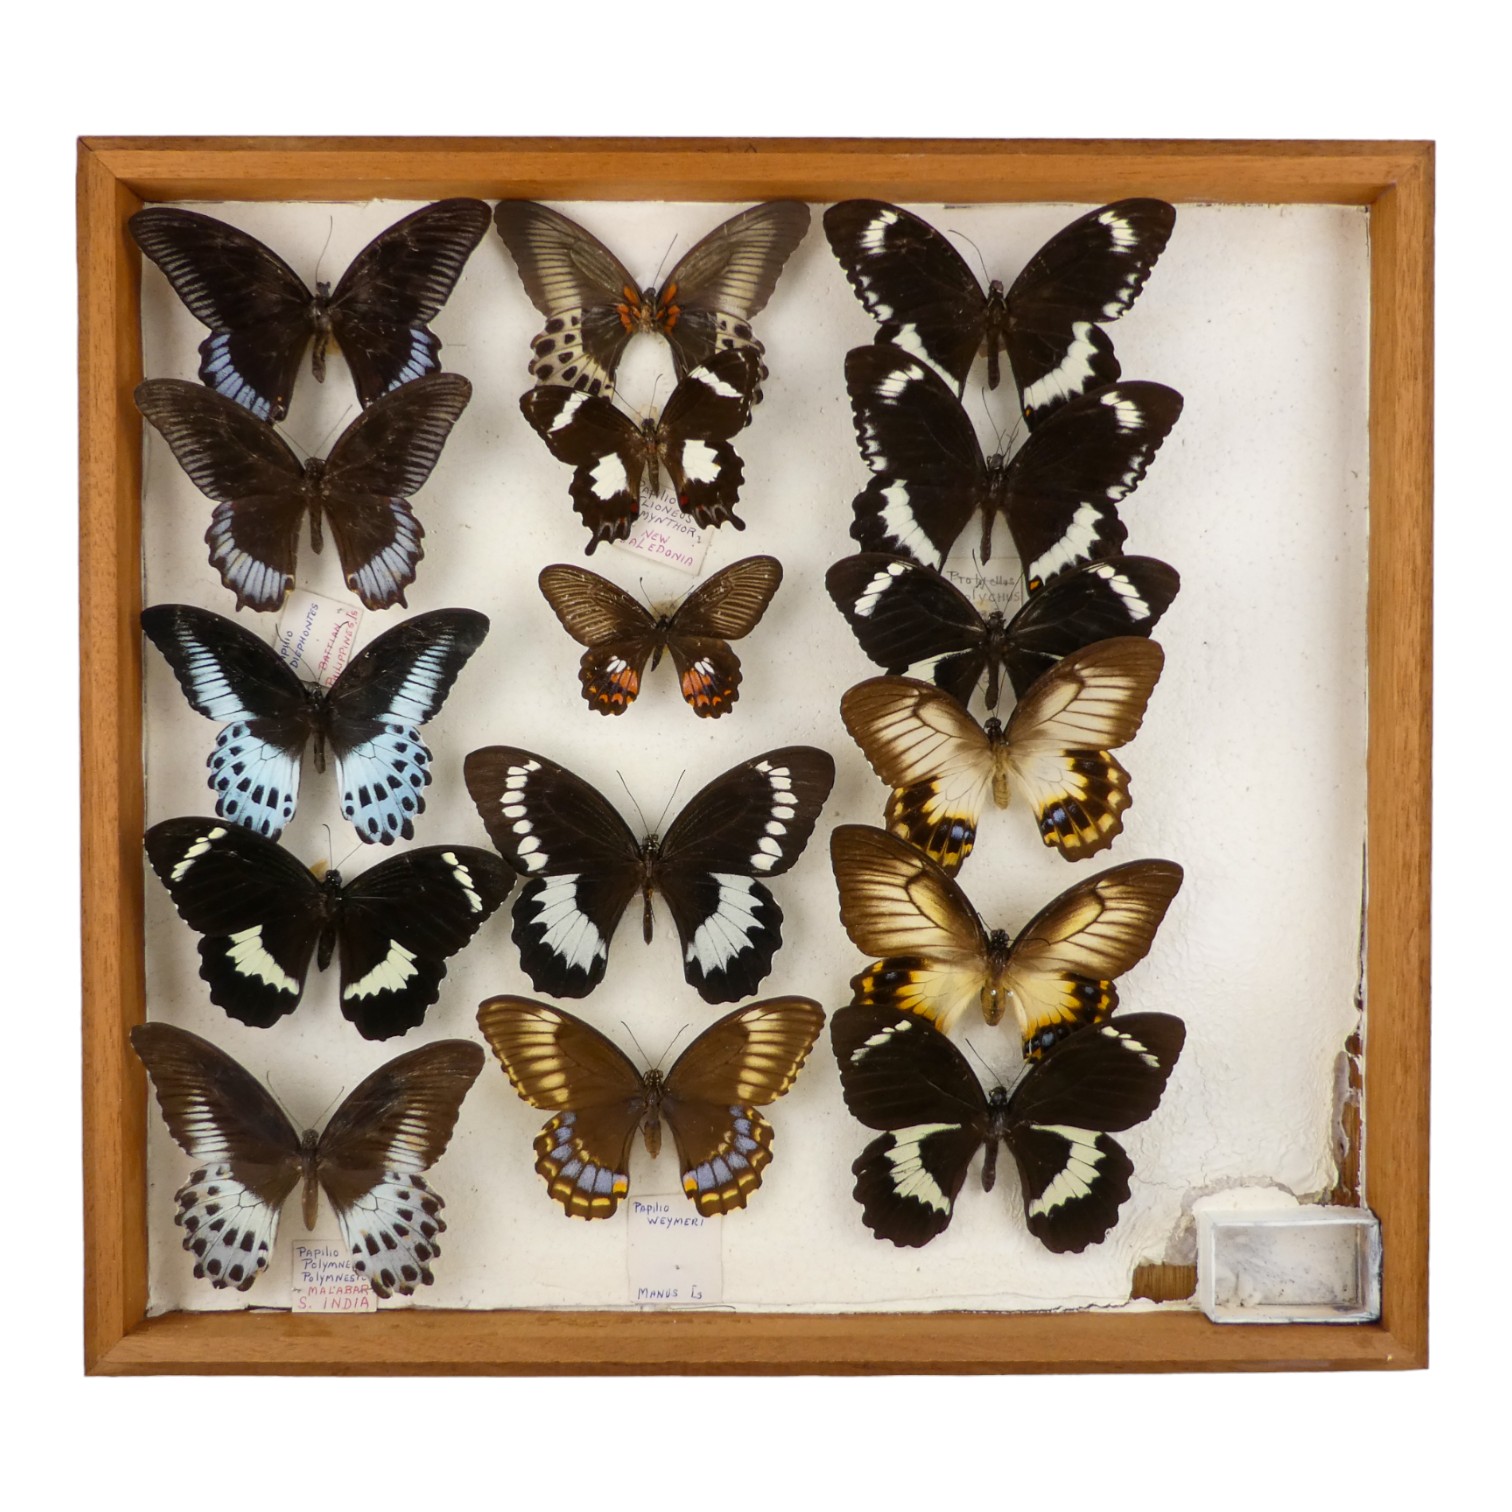 A case of butterflies in three rows - including Blue Mormon, Orchard Swallowtail and Common Mormon